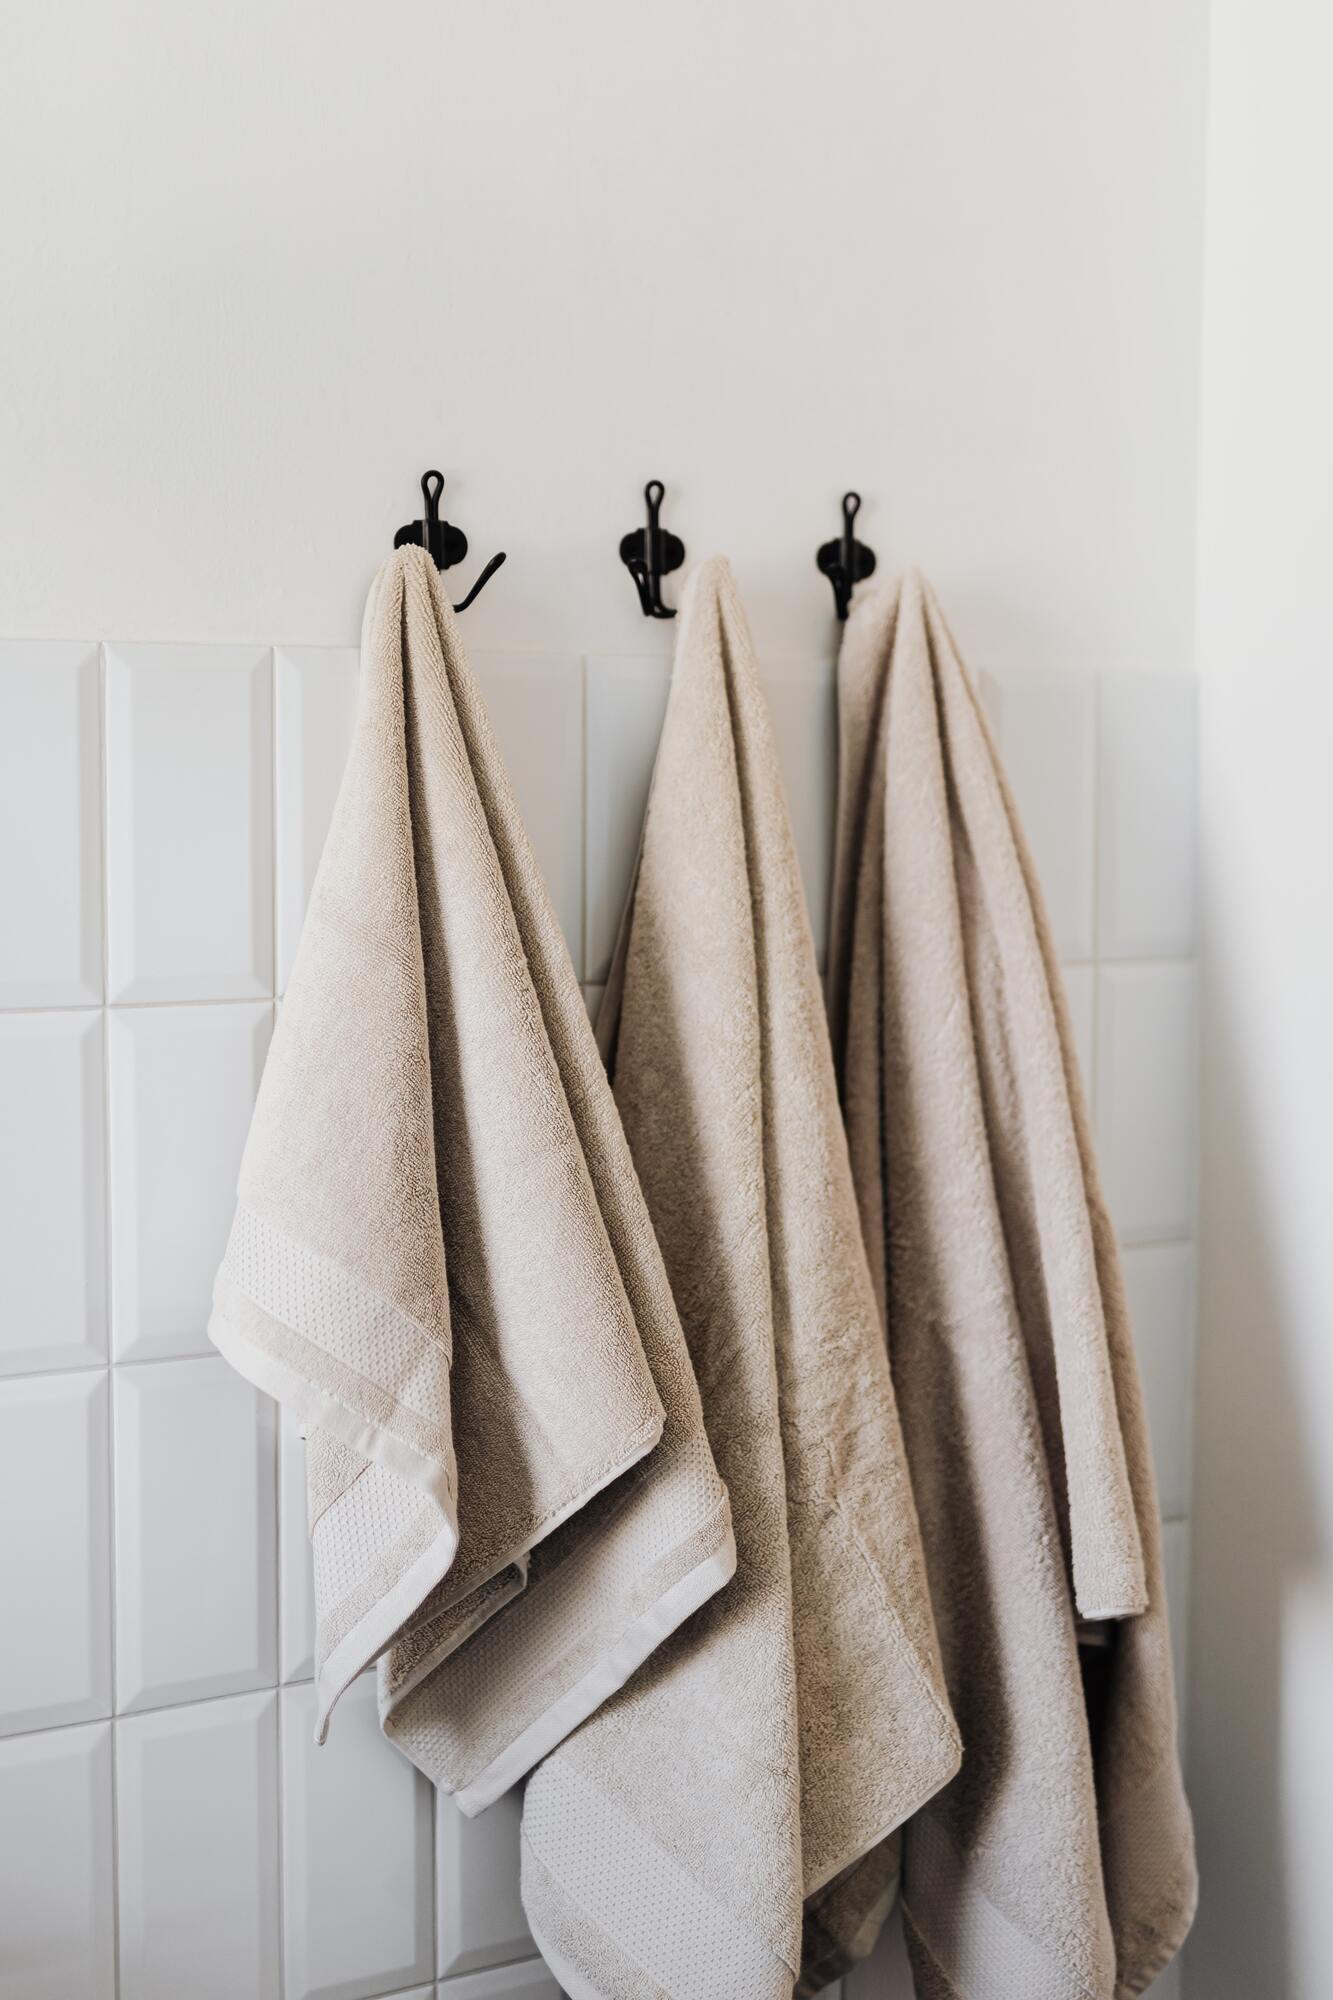 How to properly wash towels from stains